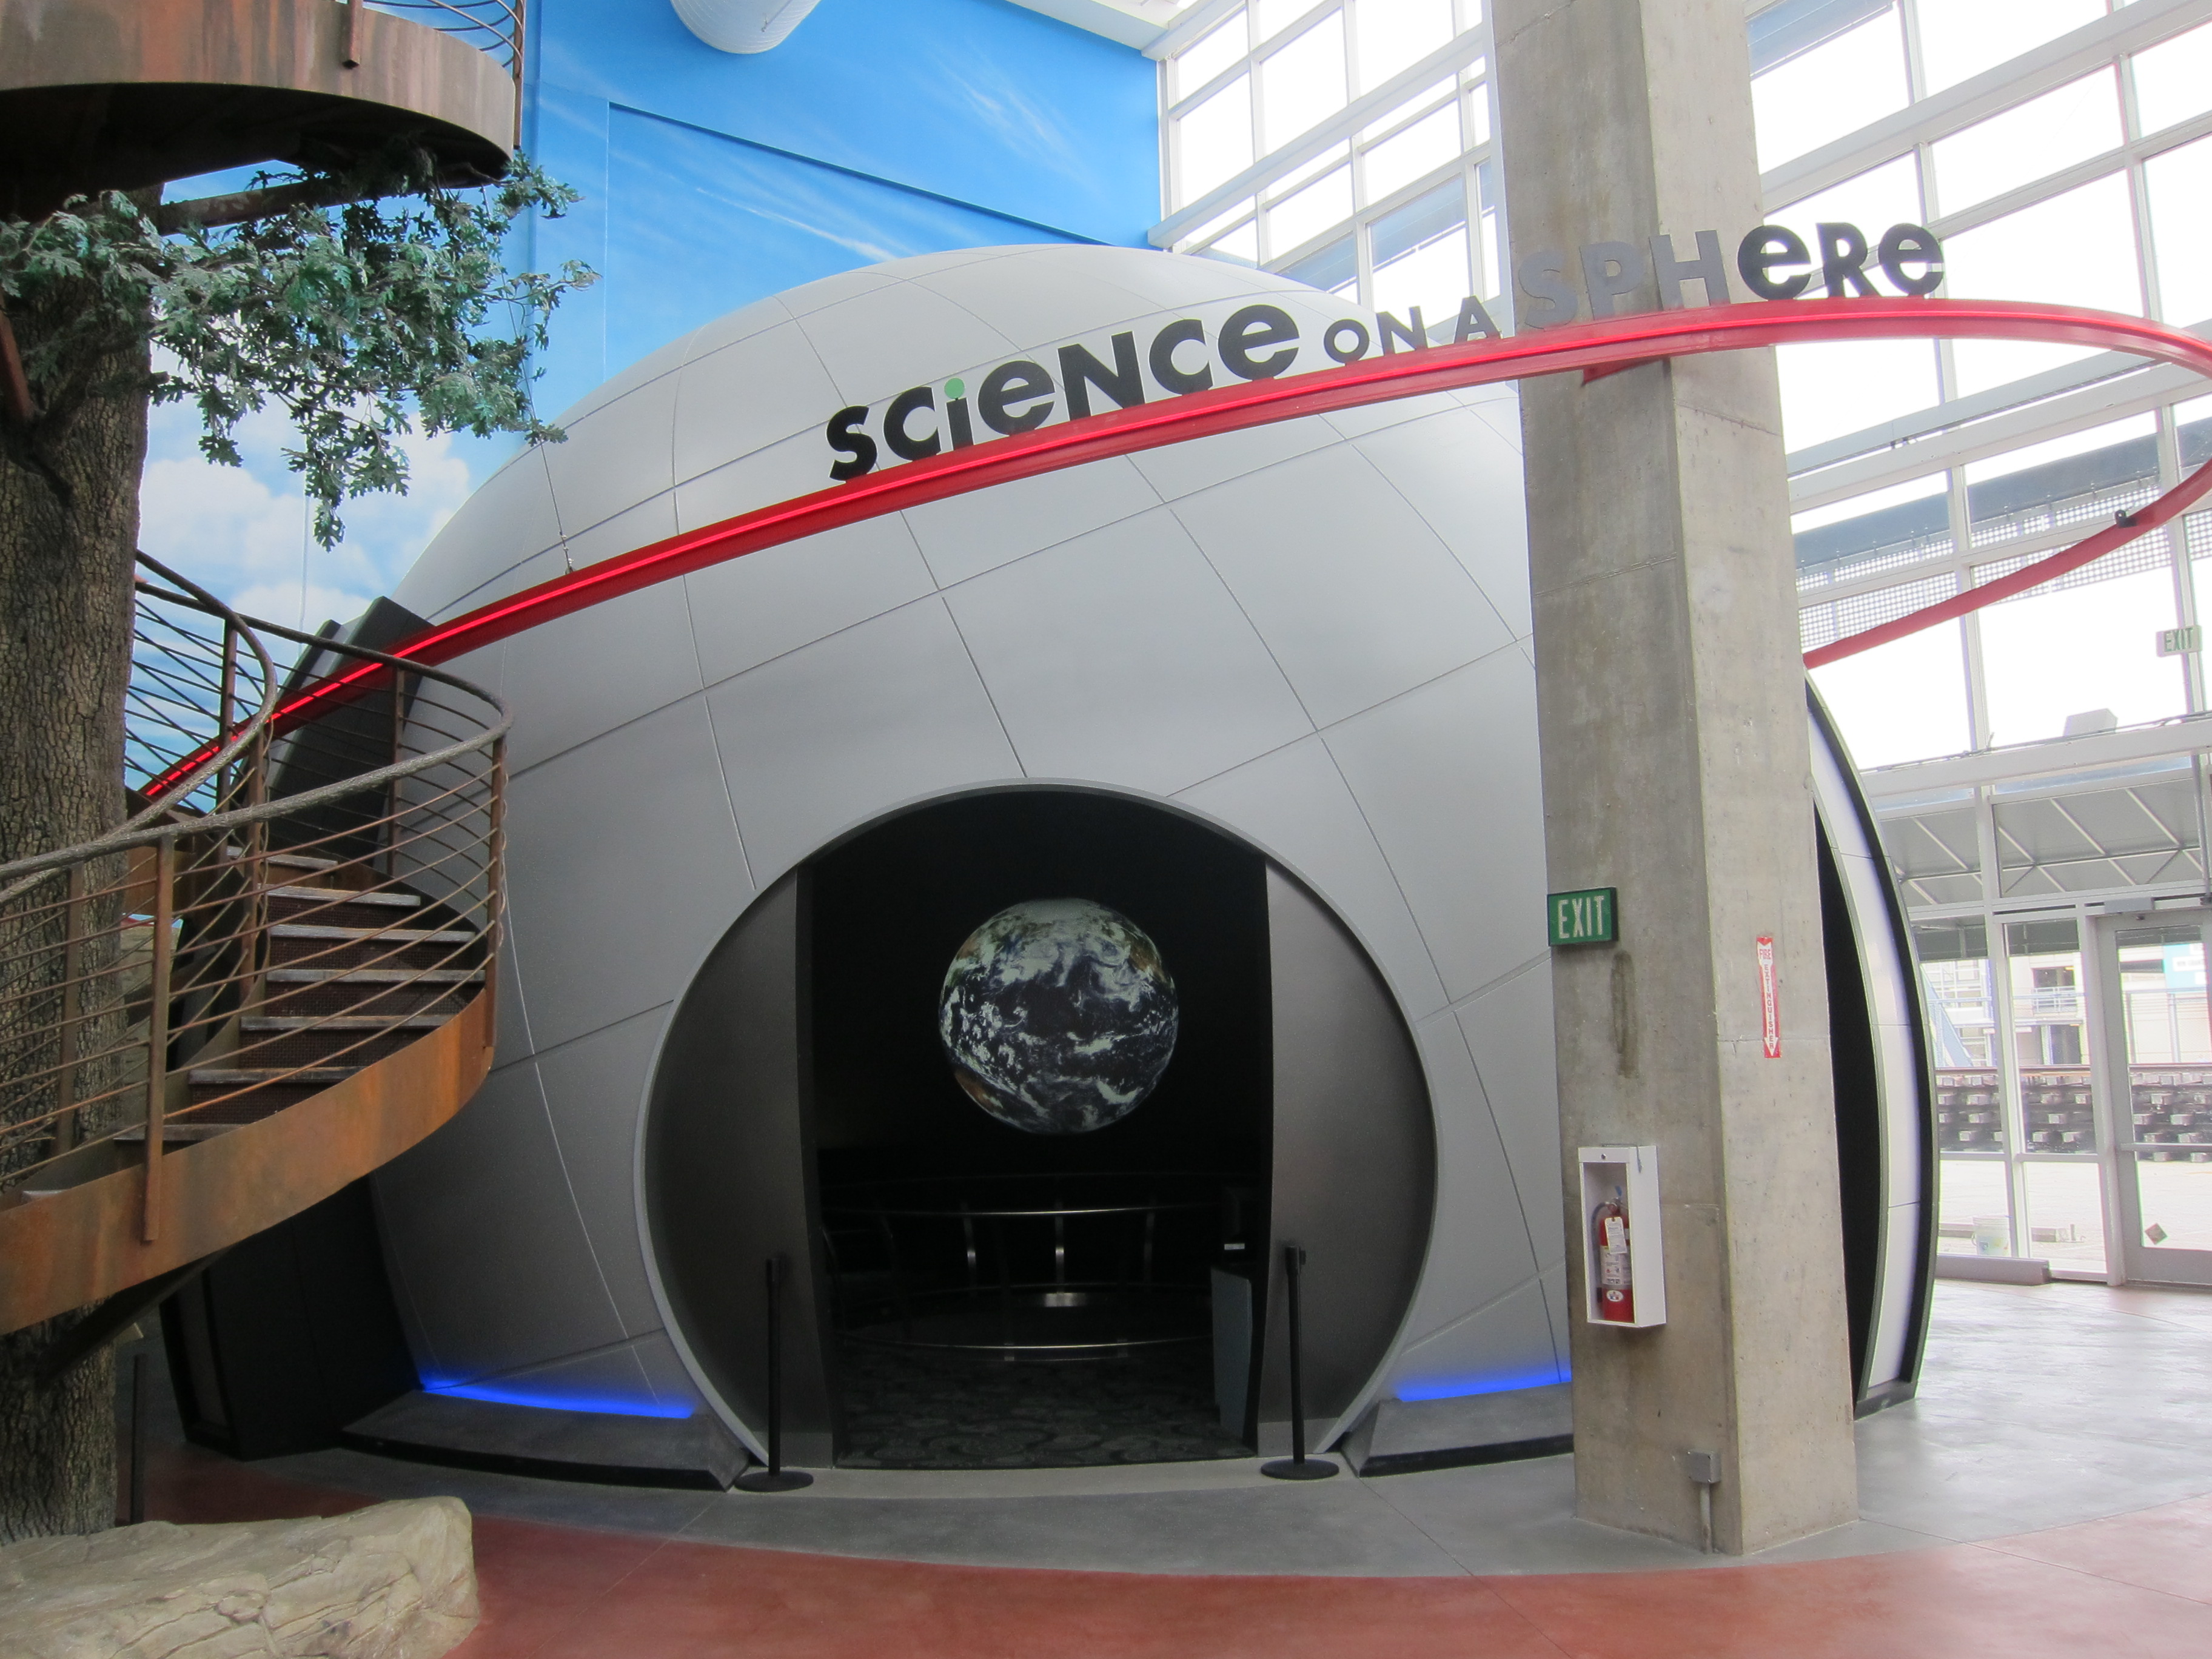 Science On a Sphere is visible through the entry to a small dome inside a larger exhibit hall